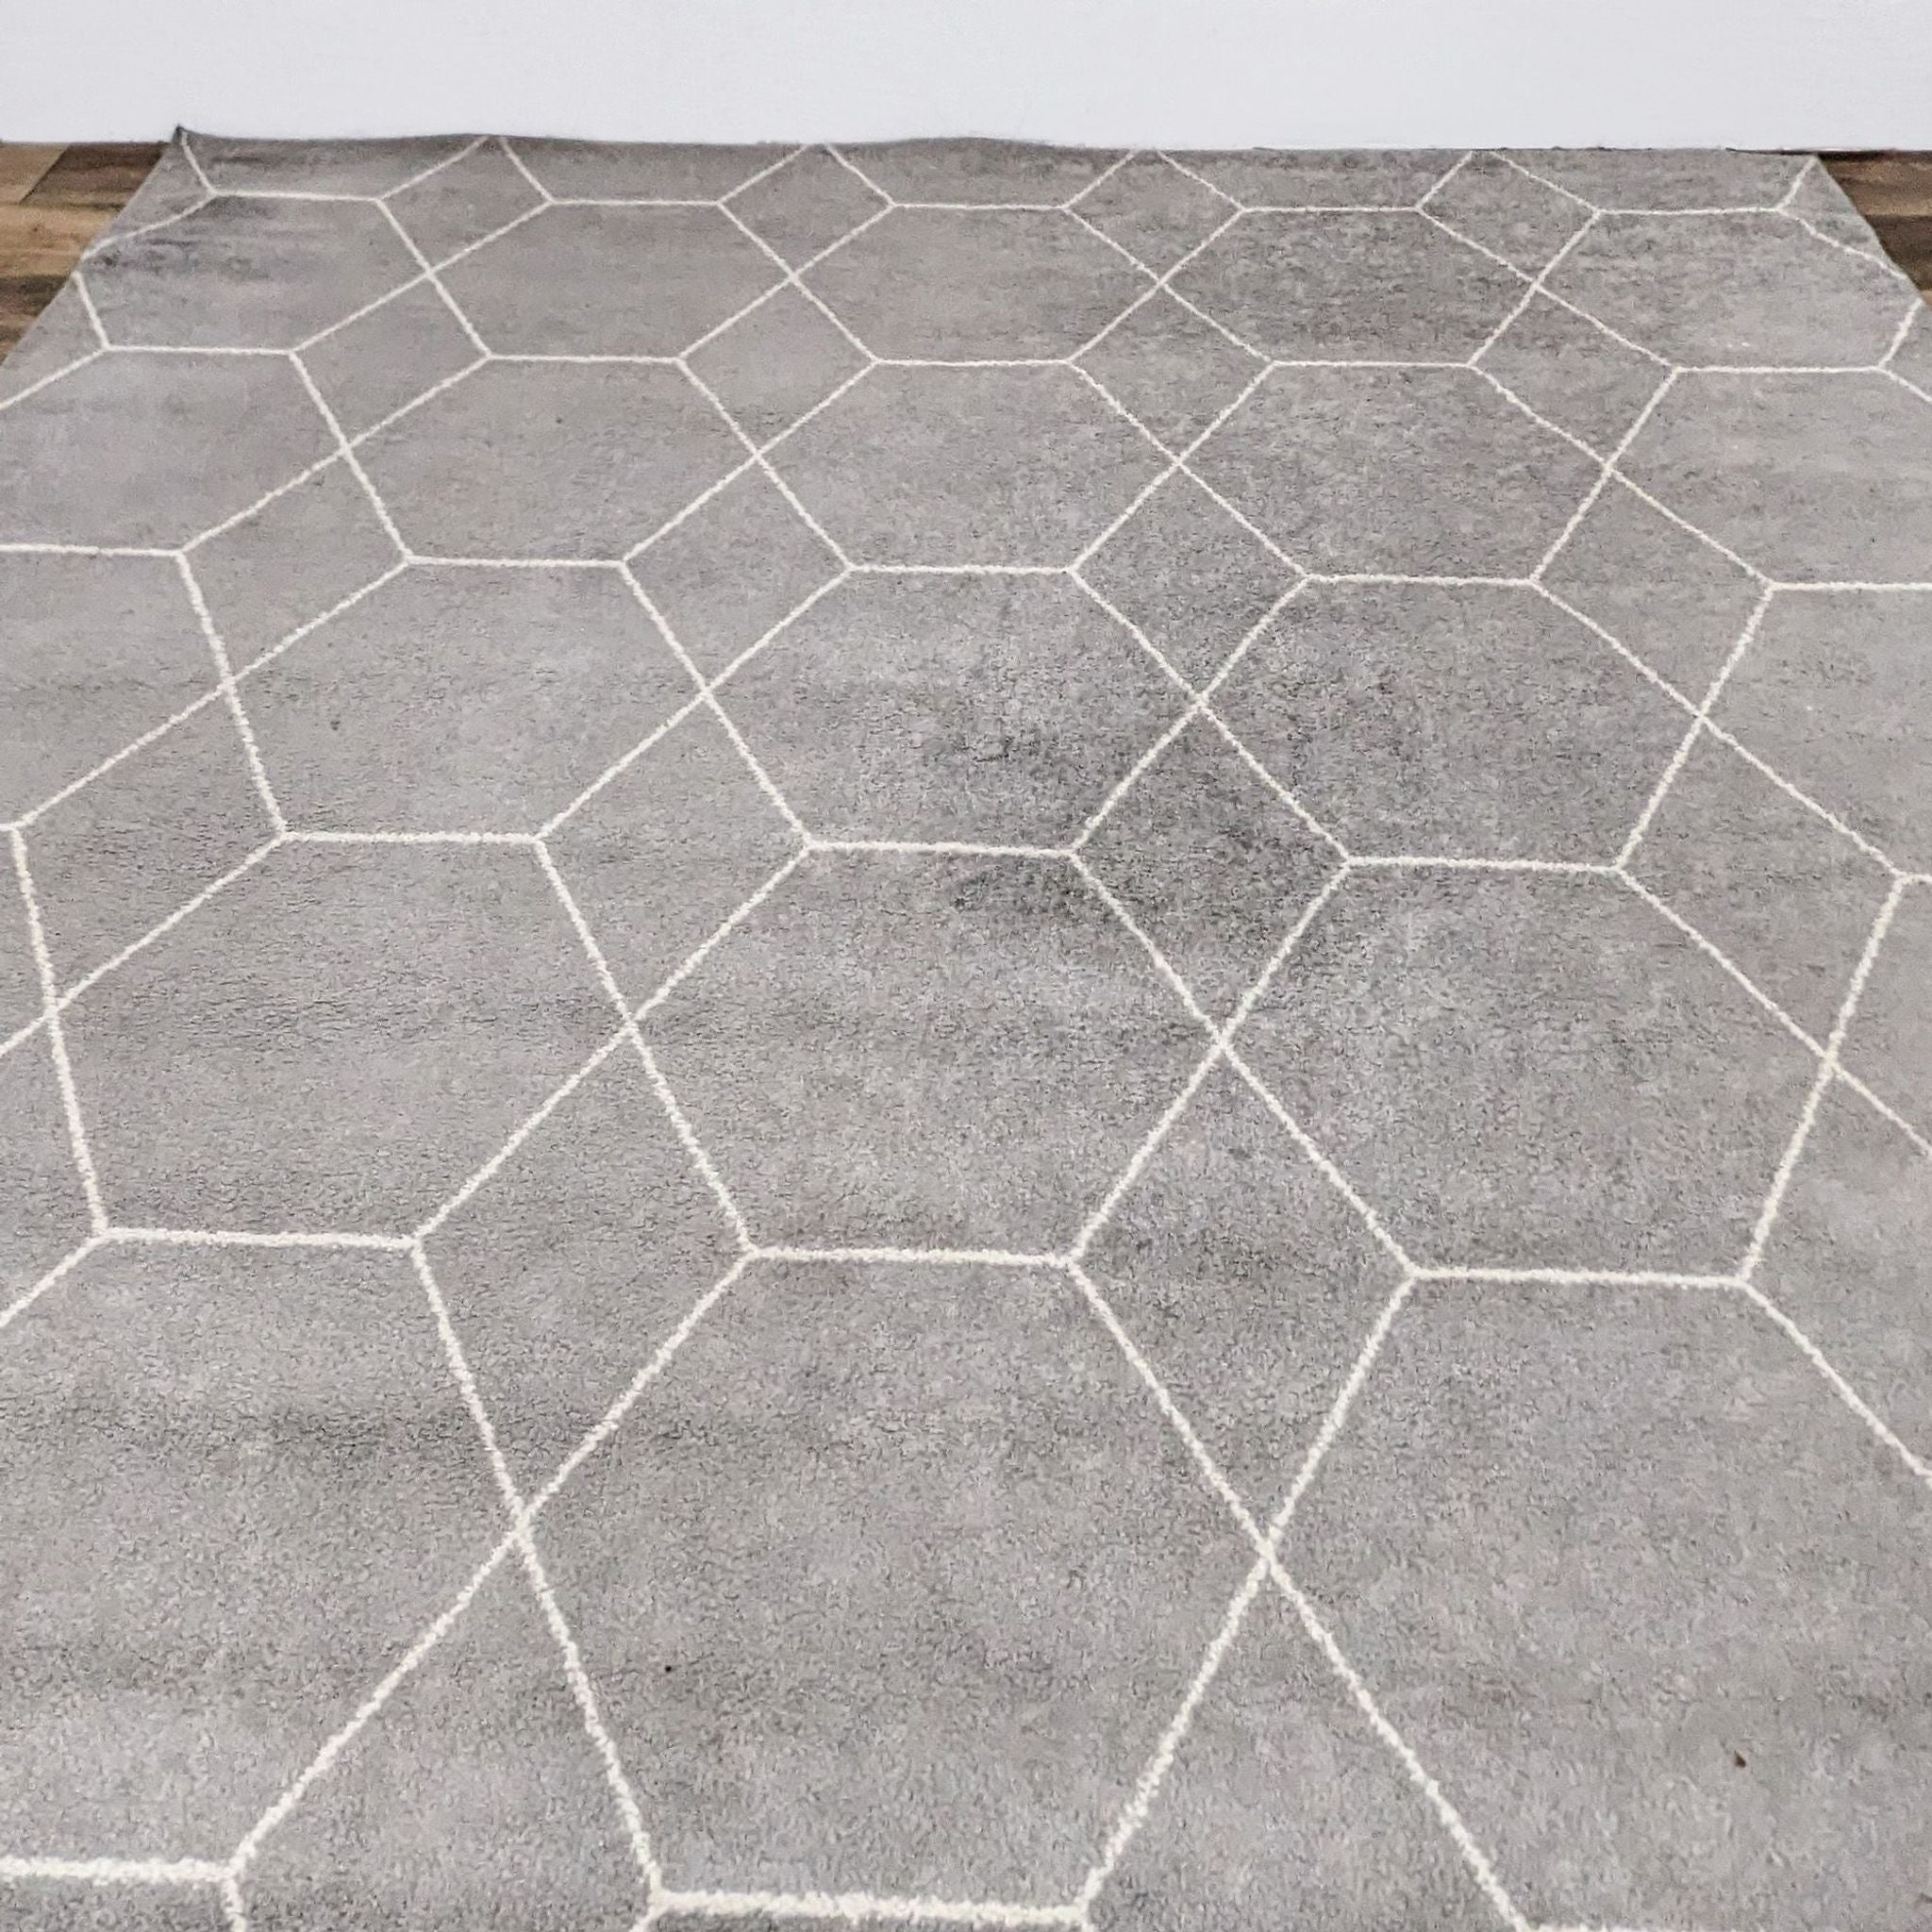 Ivory medium pile area rug with geometric trellis pattern by Unique Loom on a wooden floor.